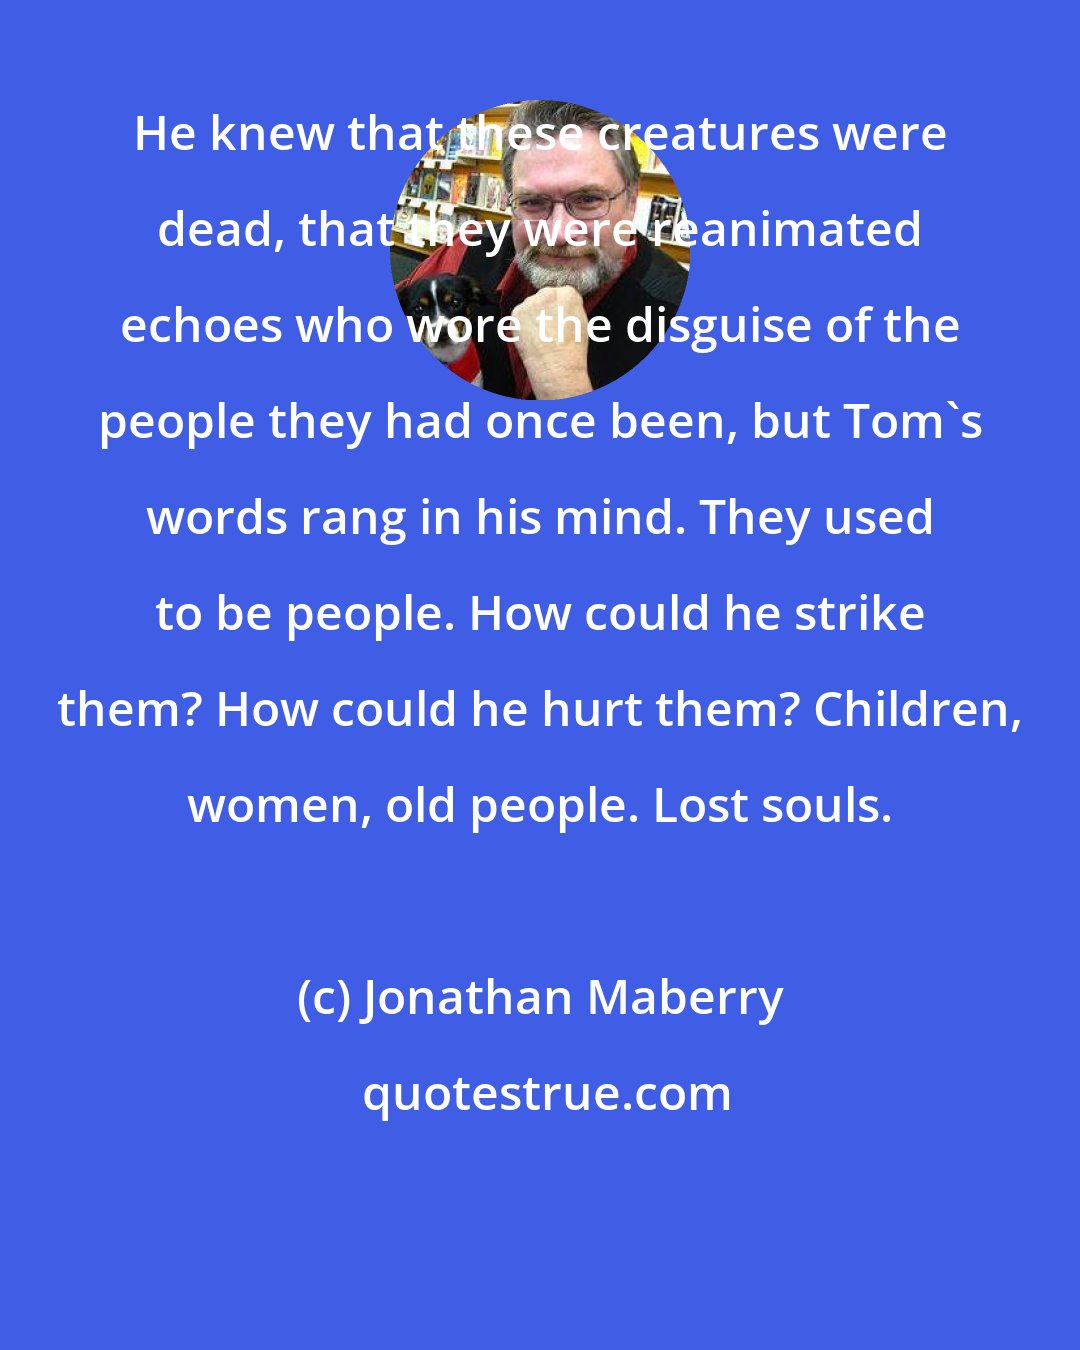 Jonathan Maberry: He knew that these creatures were dead, that they were reanimated echoes who wore the disguise of the people they had once been, but Tom's words rang in his mind. They used to be people. How could he strike them? How could he hurt them? Children, women, old people. Lost souls.